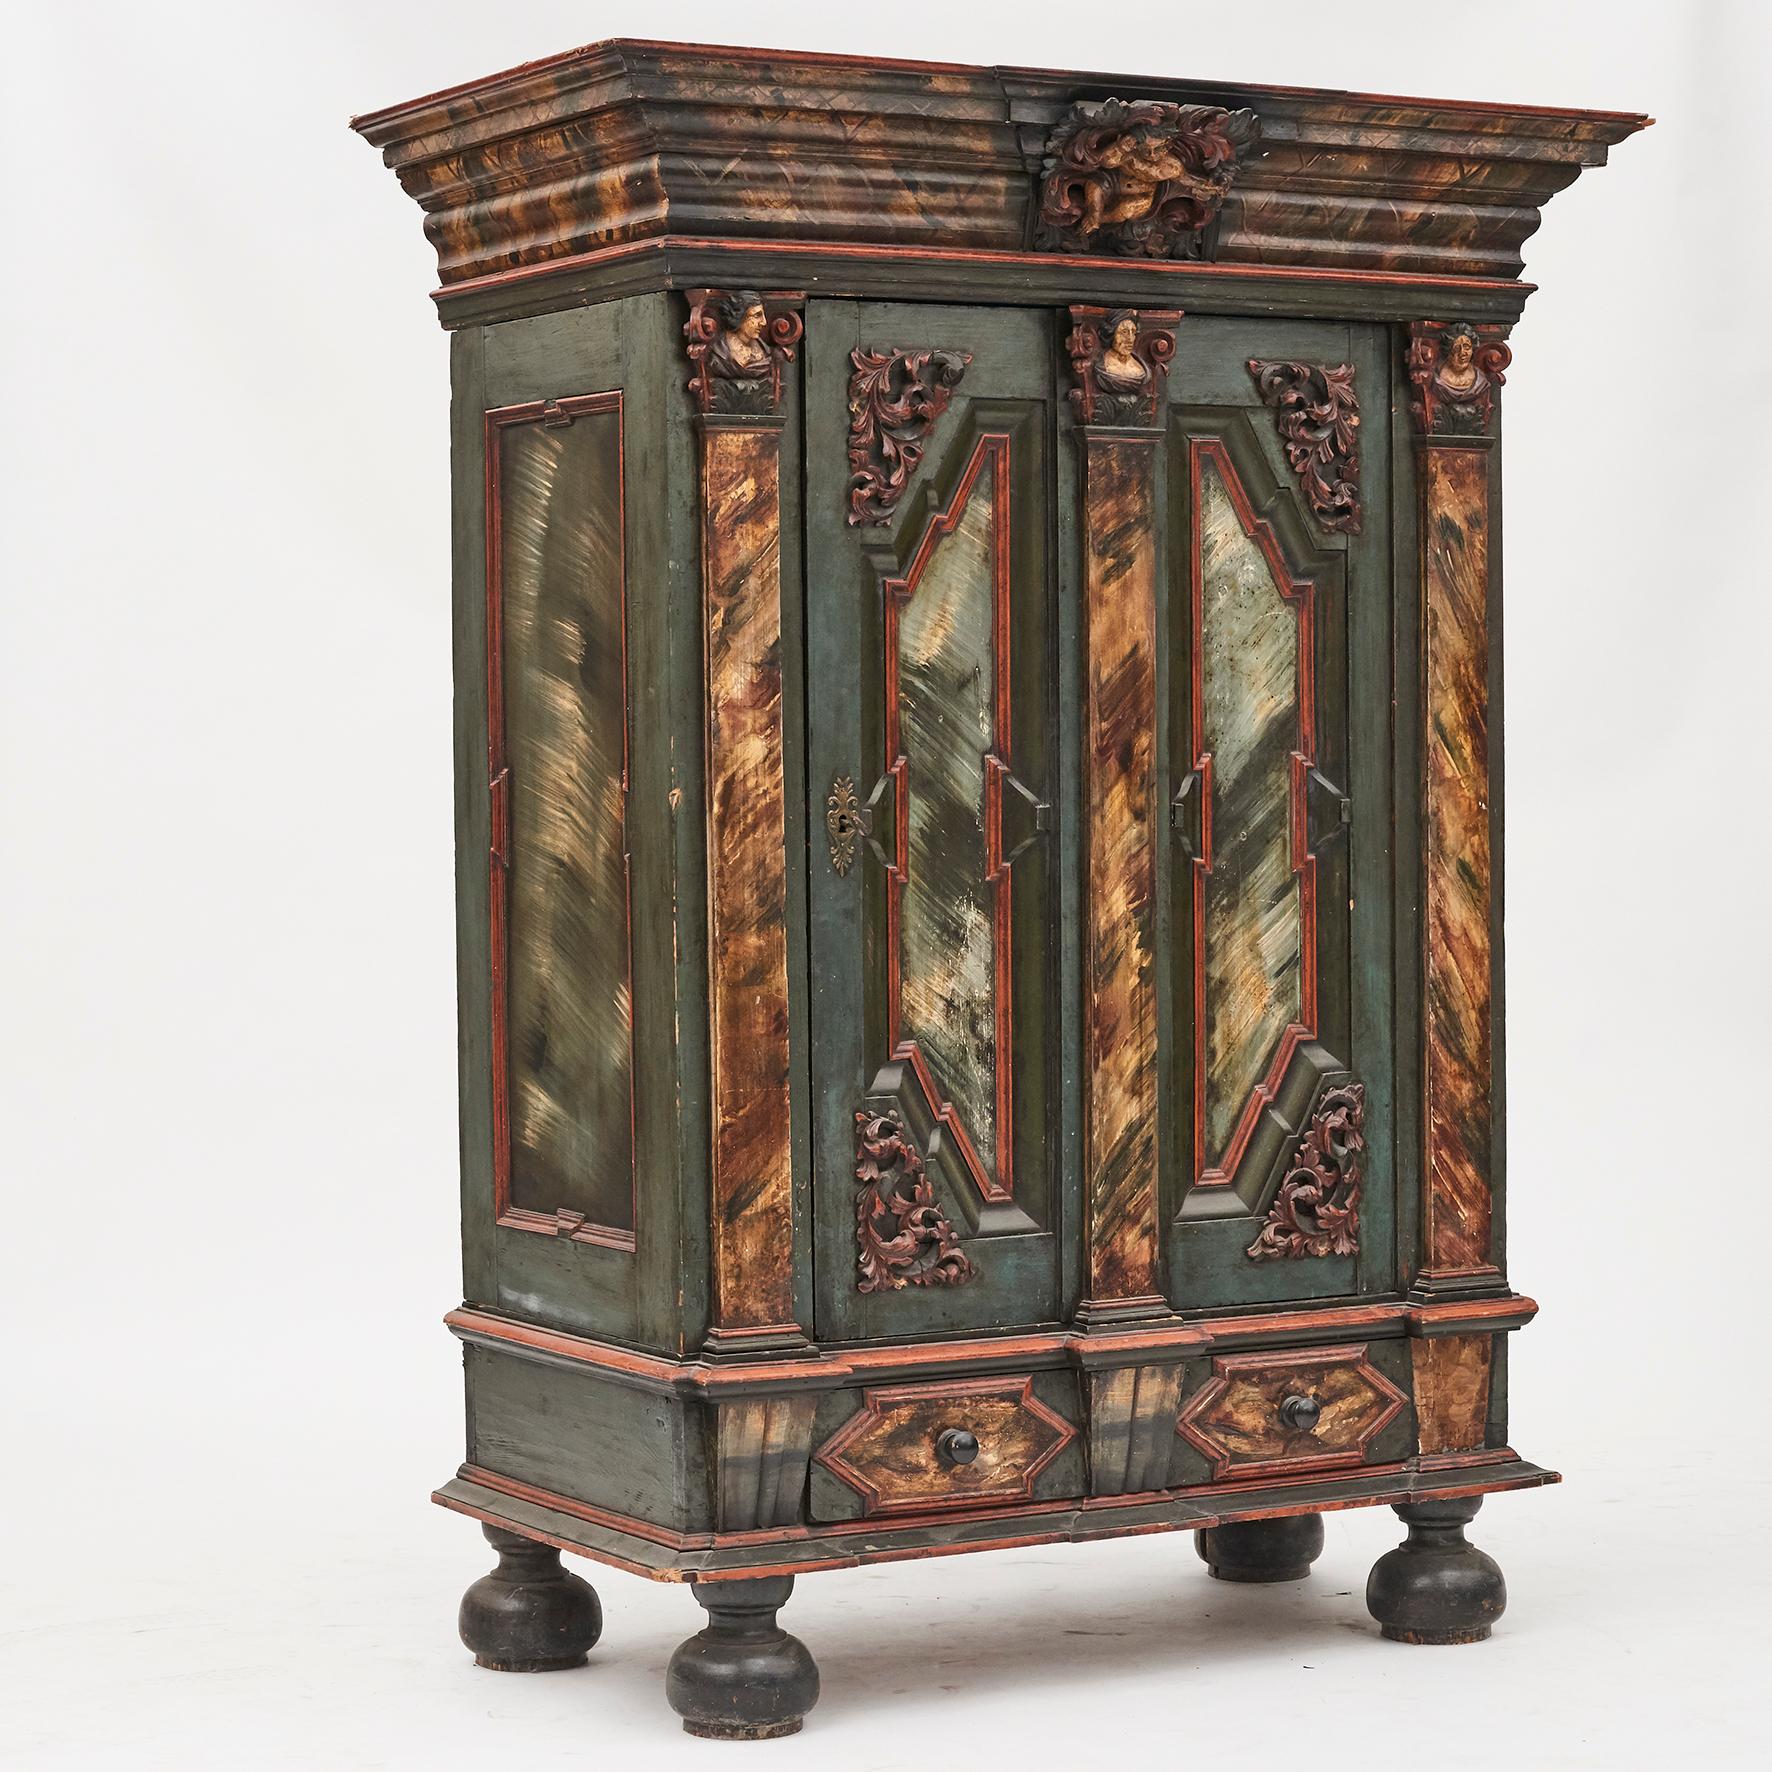 A Danish 18th century baroque cabinet with rich carved wood details.

Features a nicely molded and overhung cornice, with small putti (angle) wrapped within acanthus leaves, carved prominently at center.
Columns on either side and in middle with